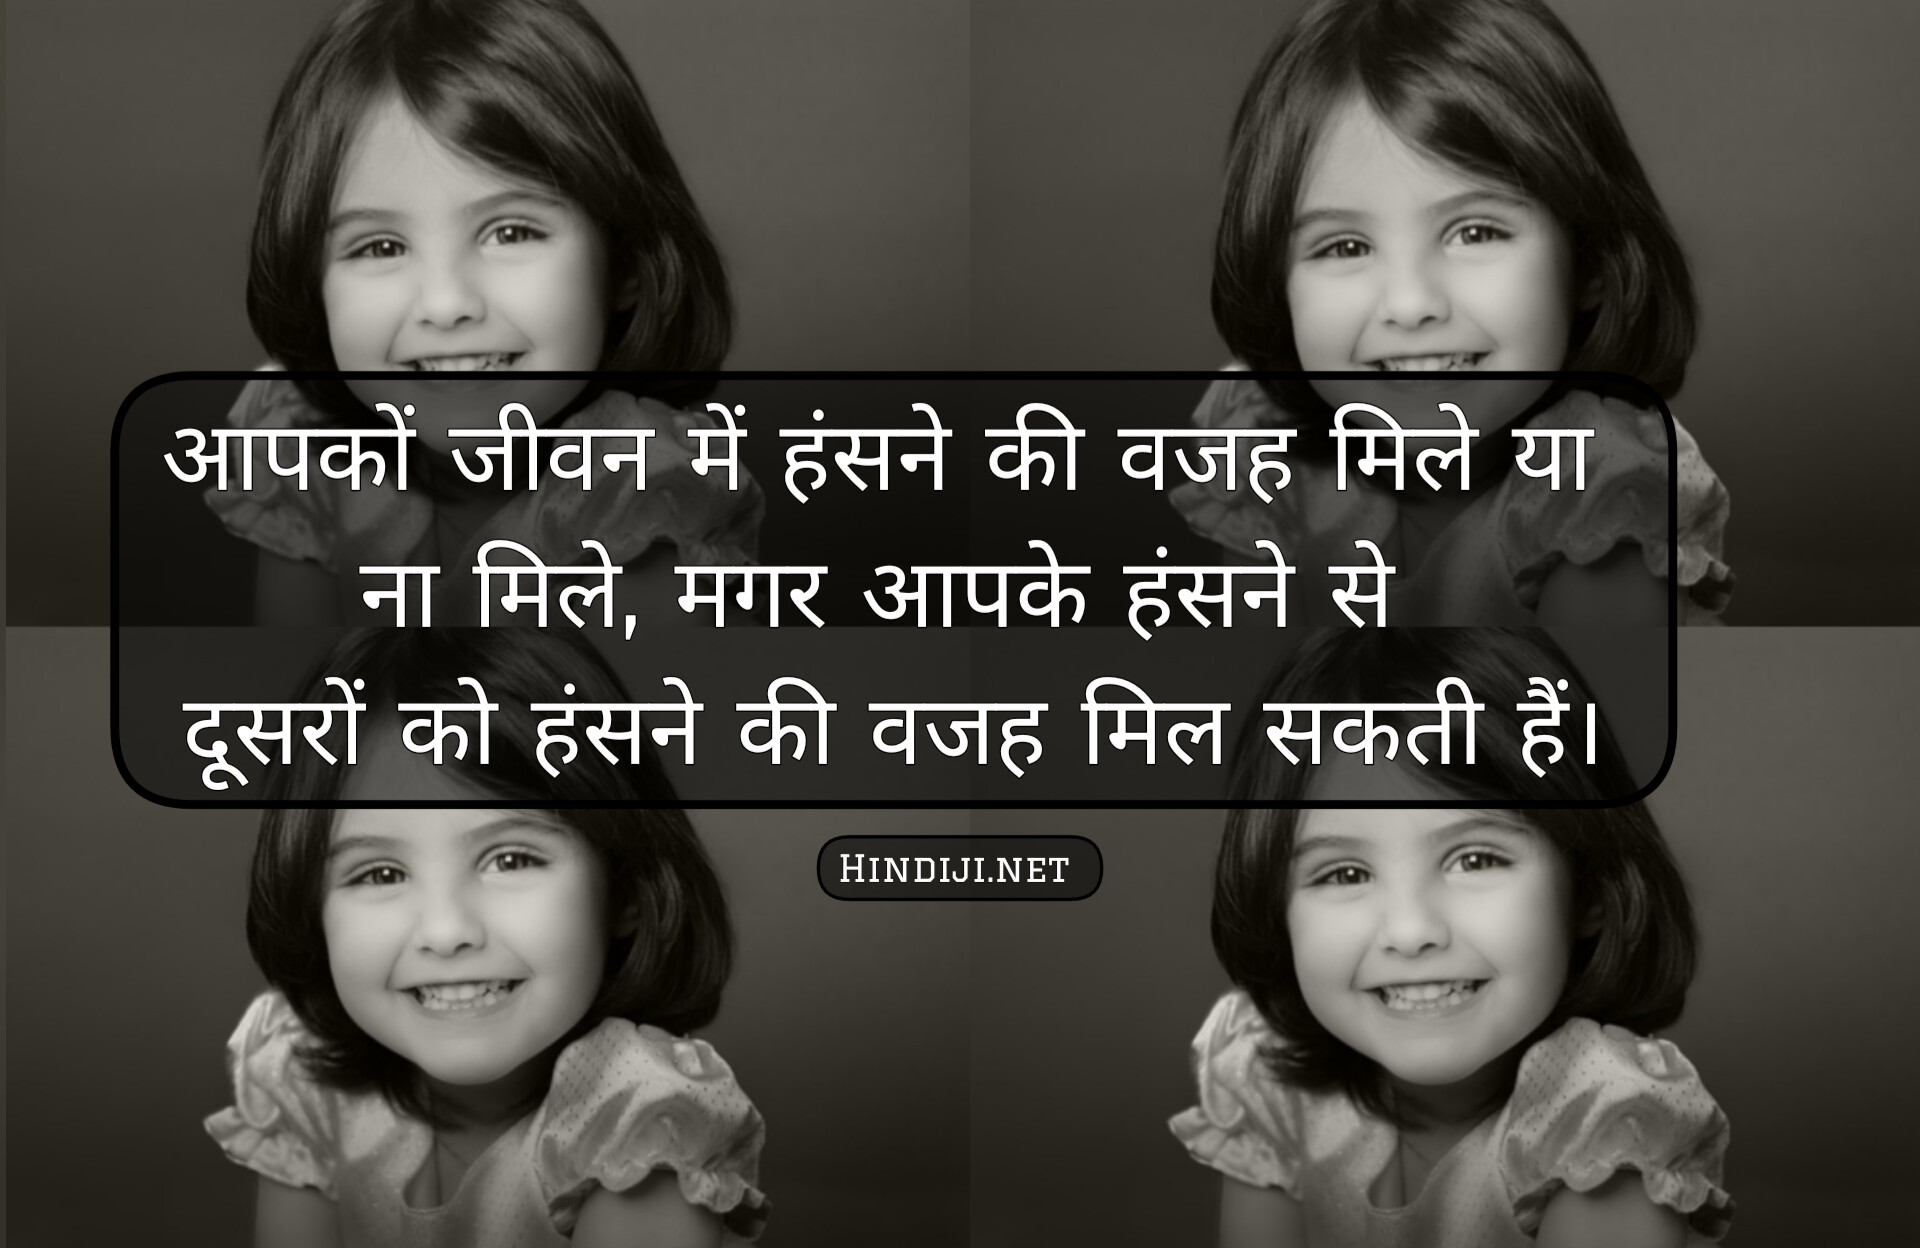 Thought in hindi